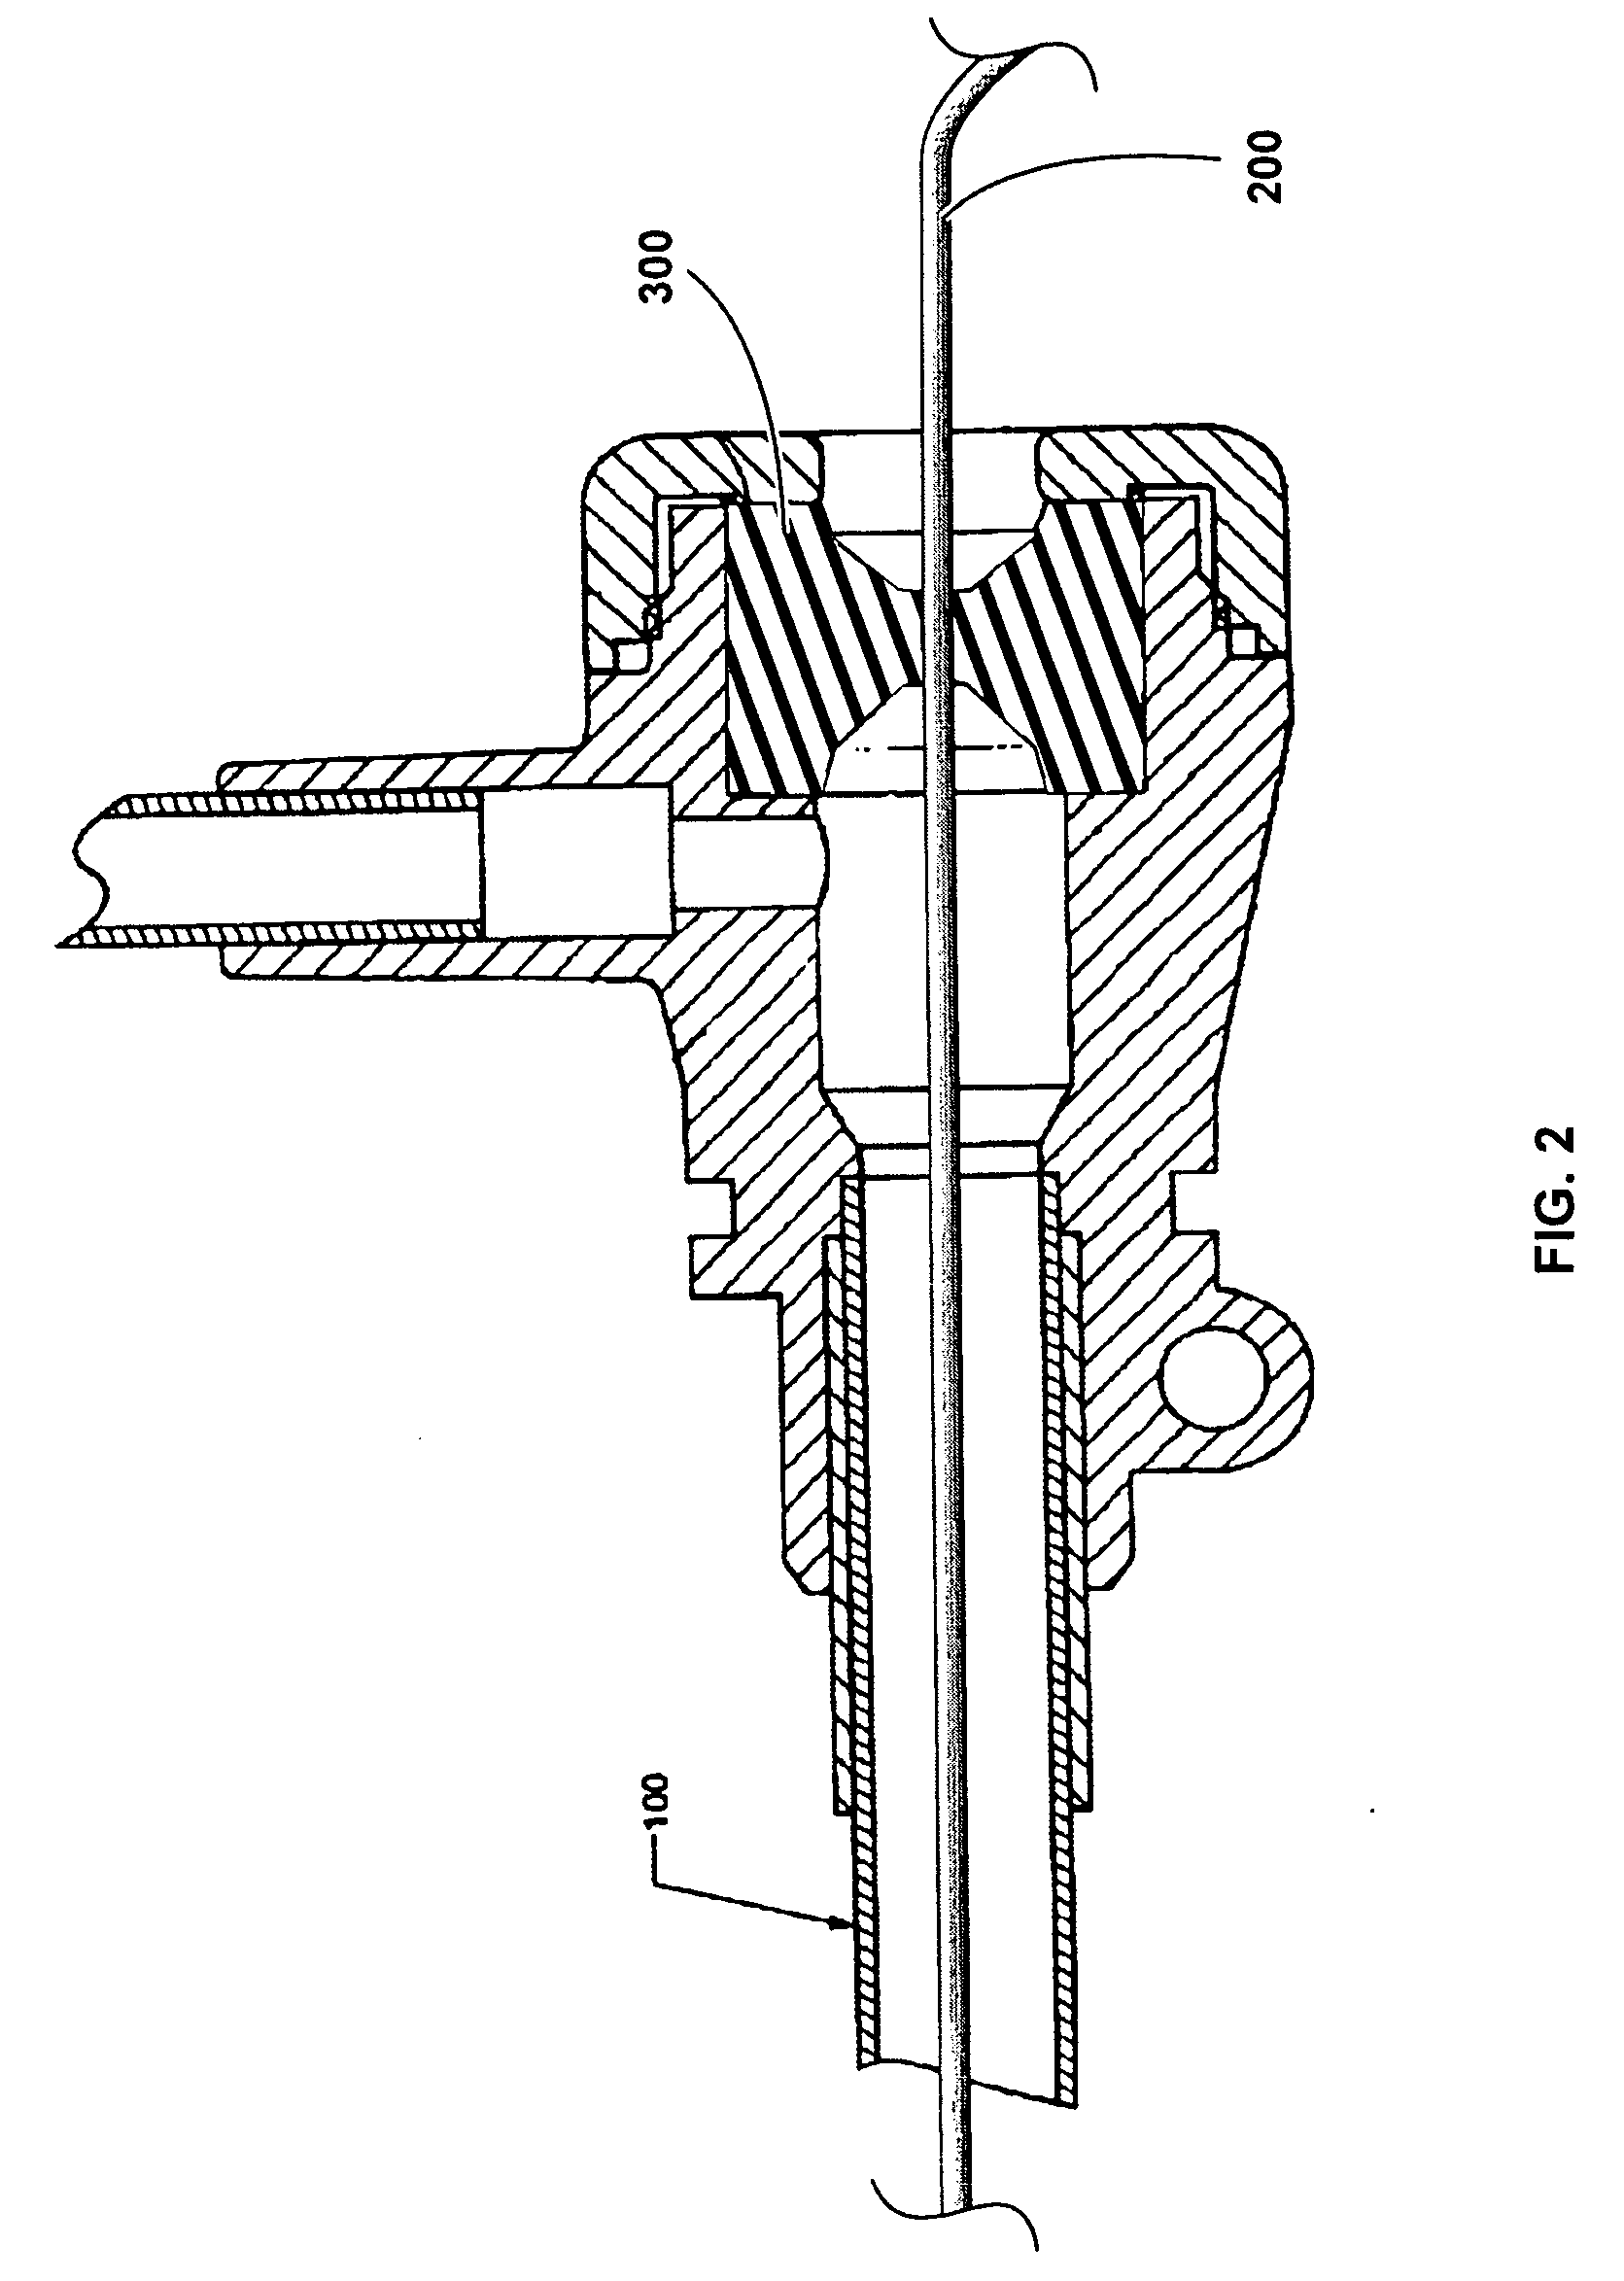 Biocompatible self-lubricating polymer compositions and their use in medical and surgical devices